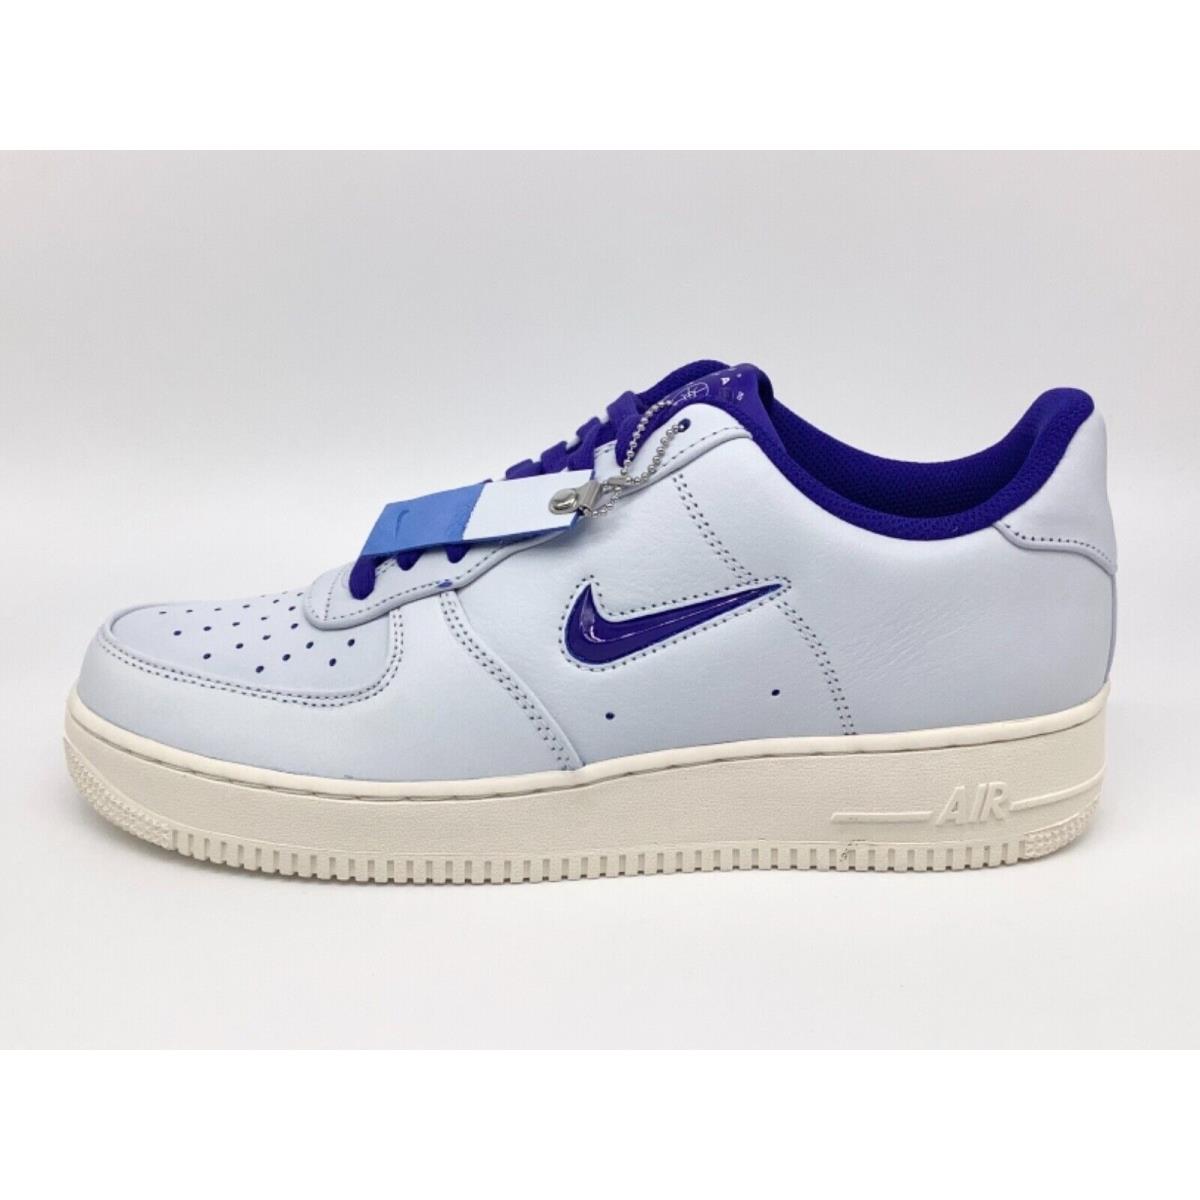 Nike shoes Air Force - Blue 9